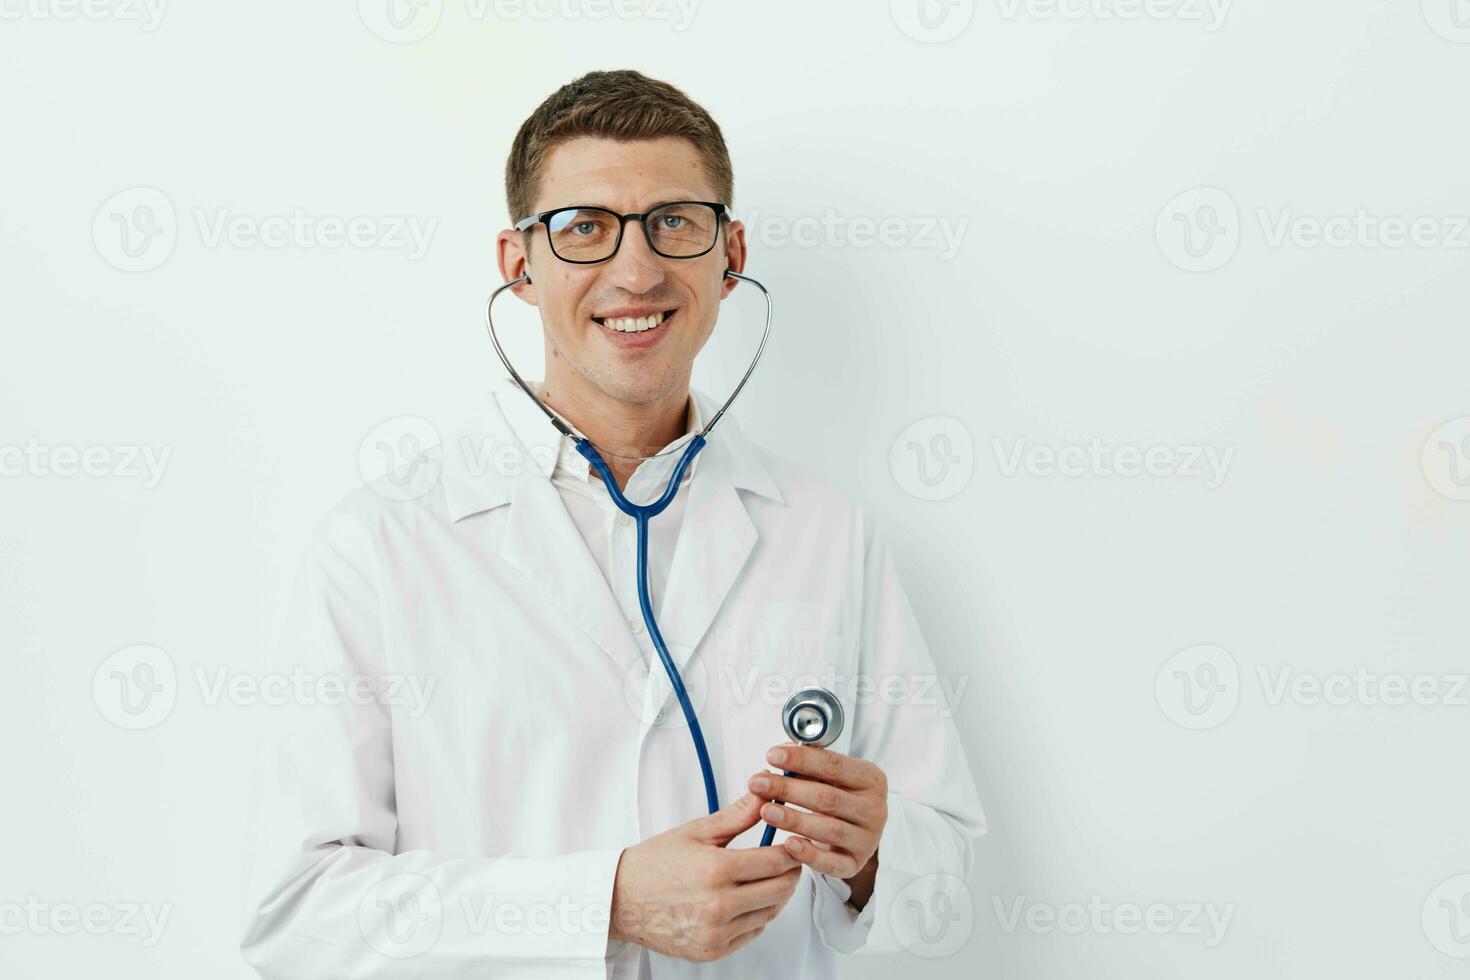 Men young hospital professional happy specialist stethoscope care occupation portrait person photo